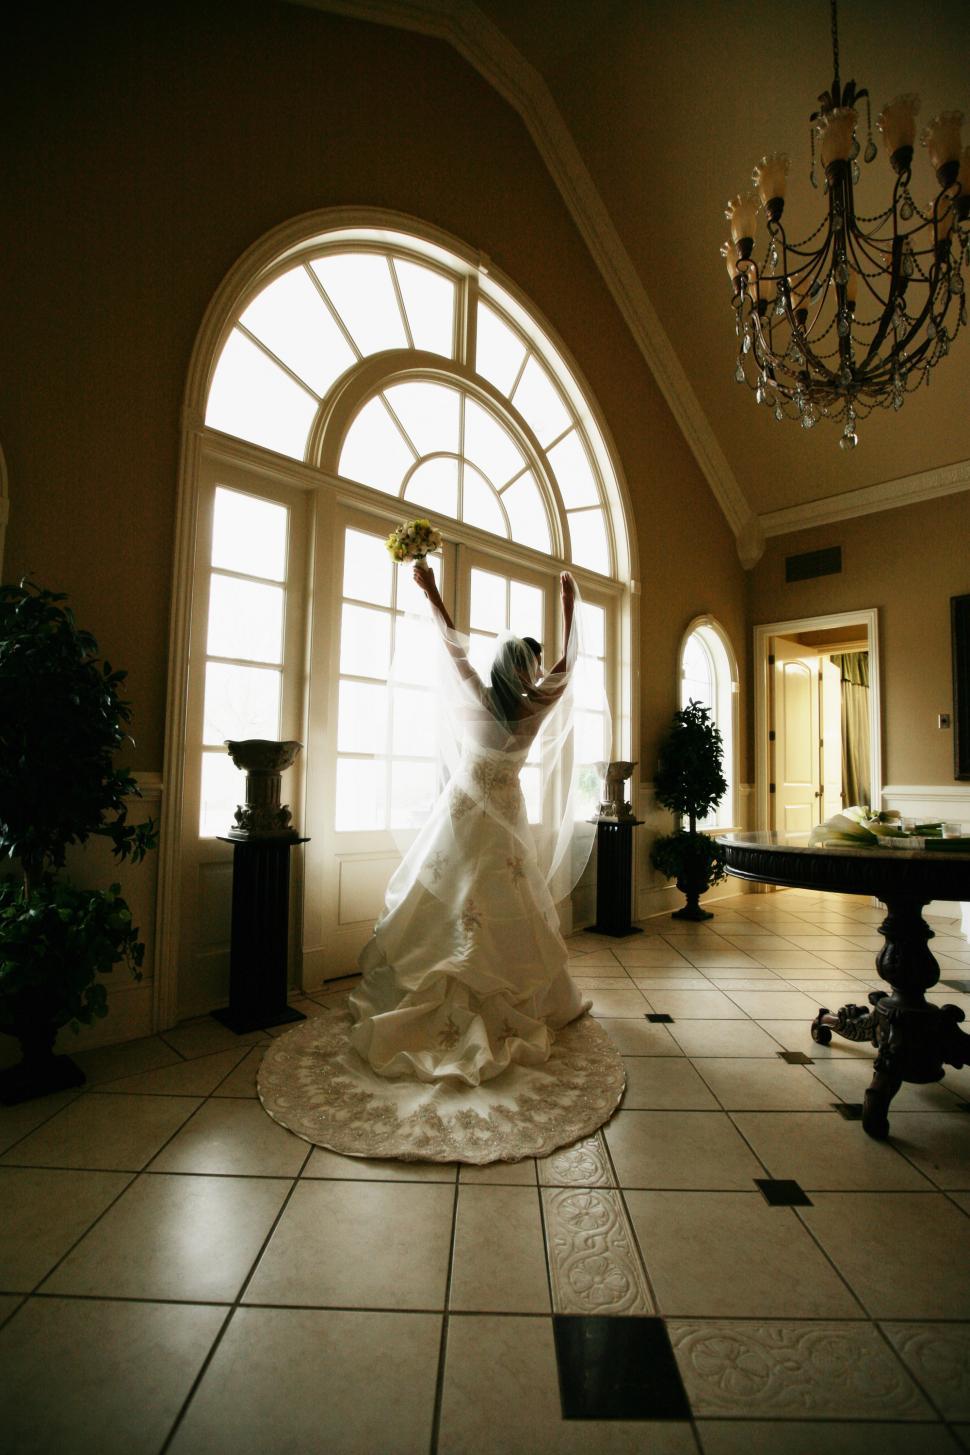 Free Image of Woman in Wedding Dress Standing in Room 